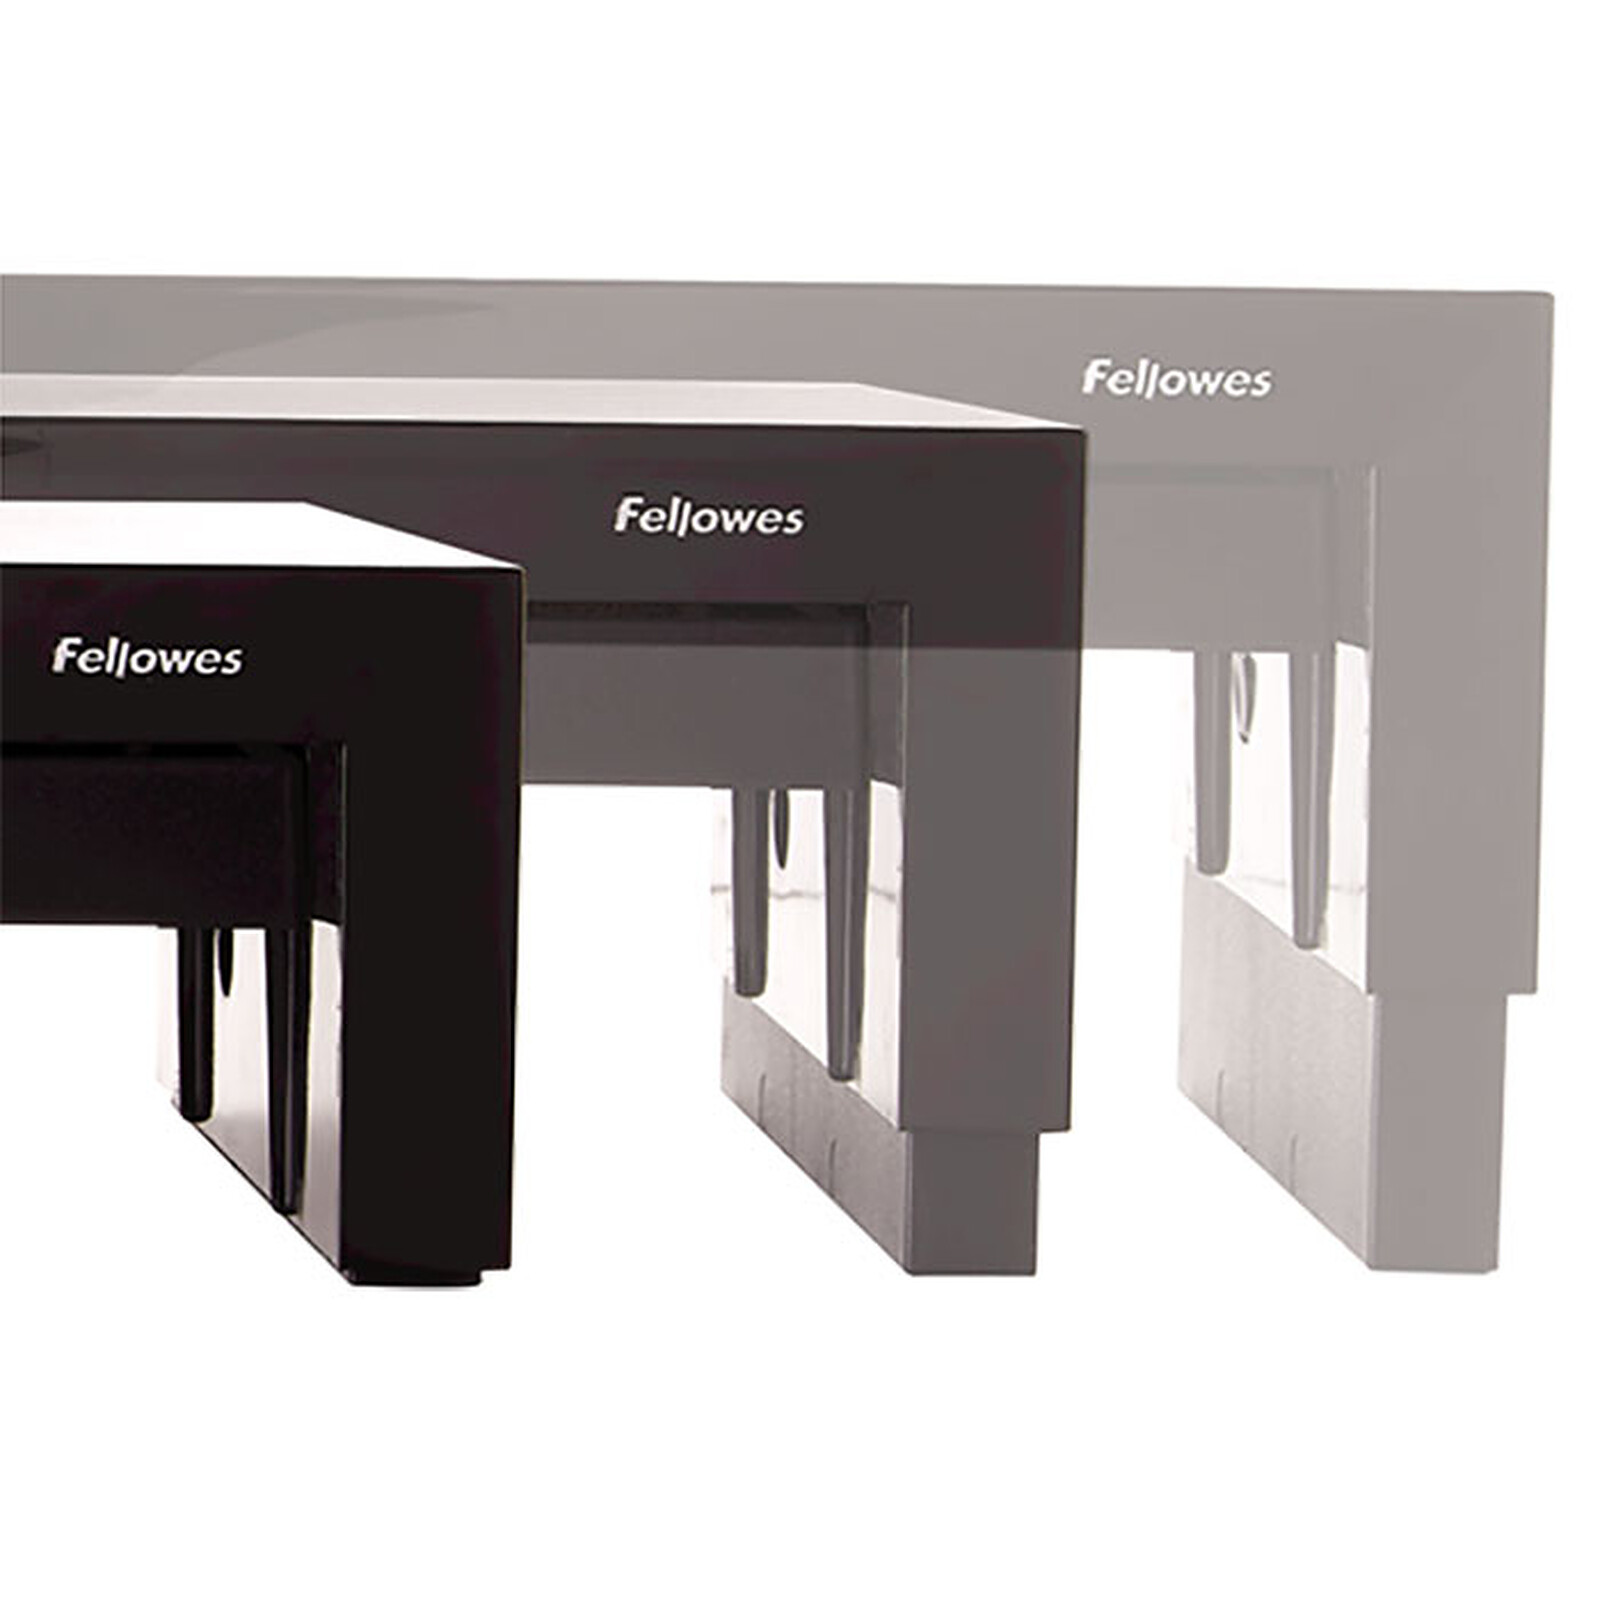 Fellowes Support Monitor Designer Suites Arm  Mount Fellowes on LDLC